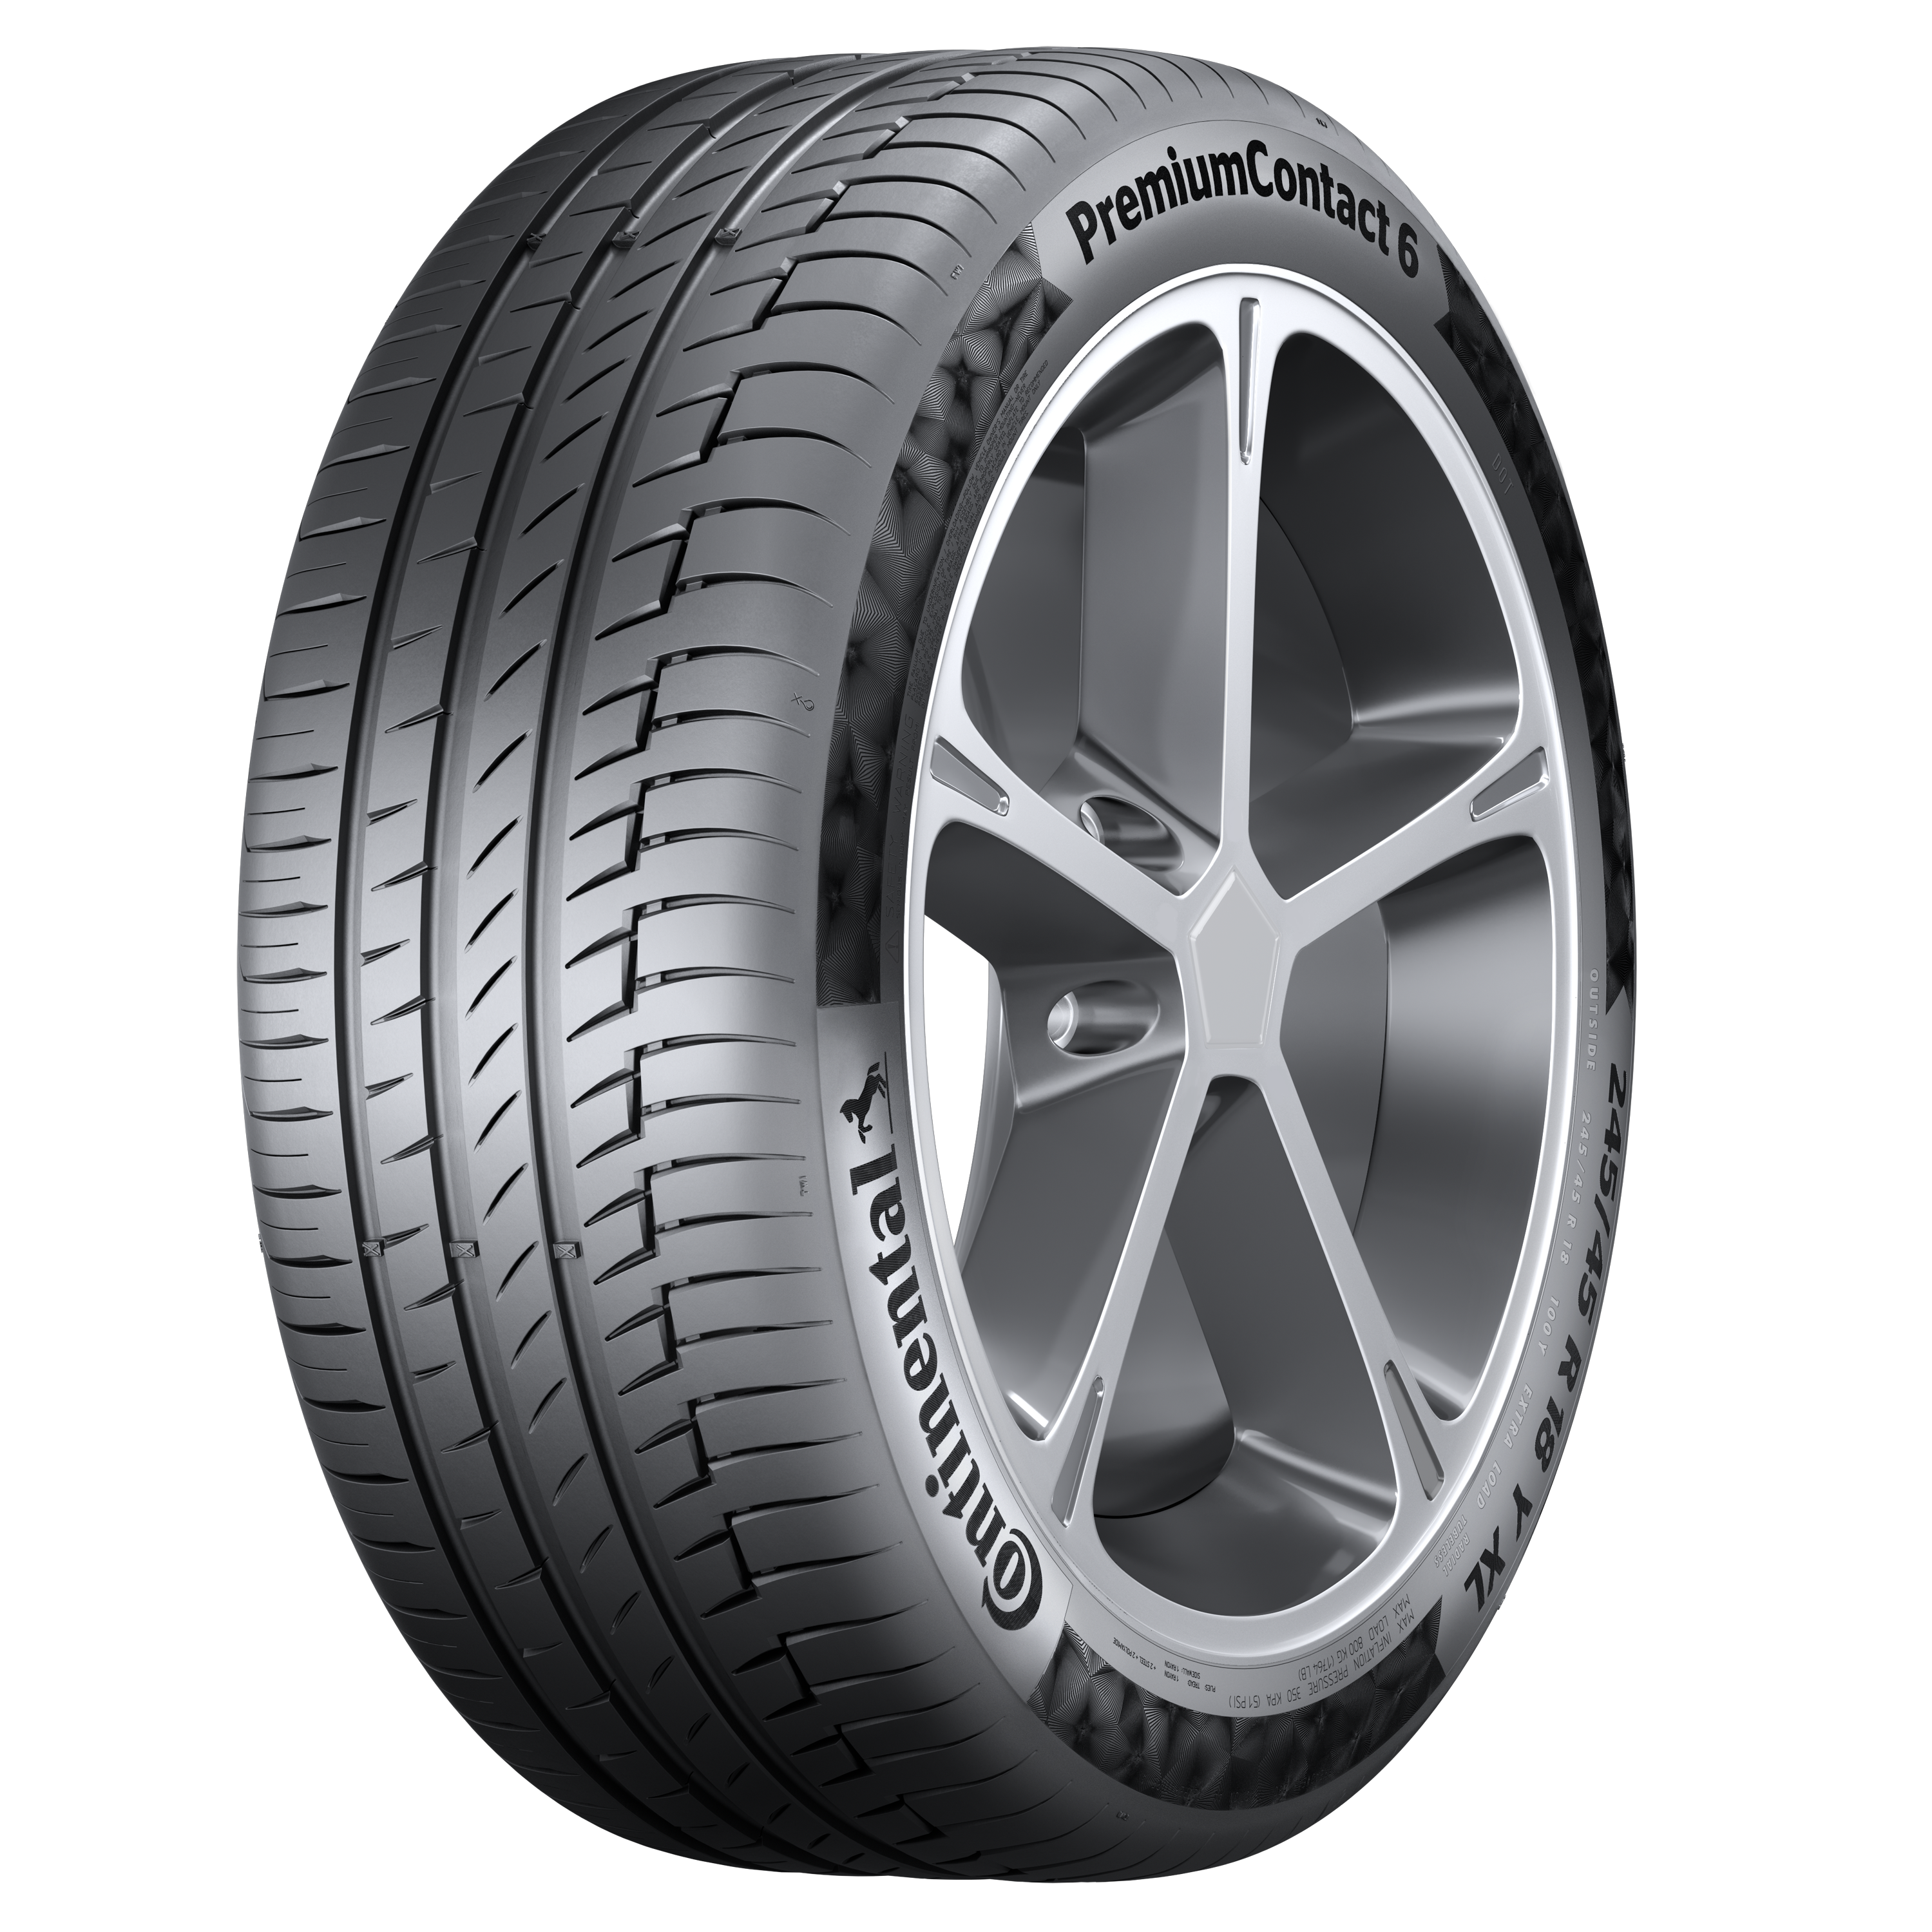 Summer car tires from Continental - Continental AG